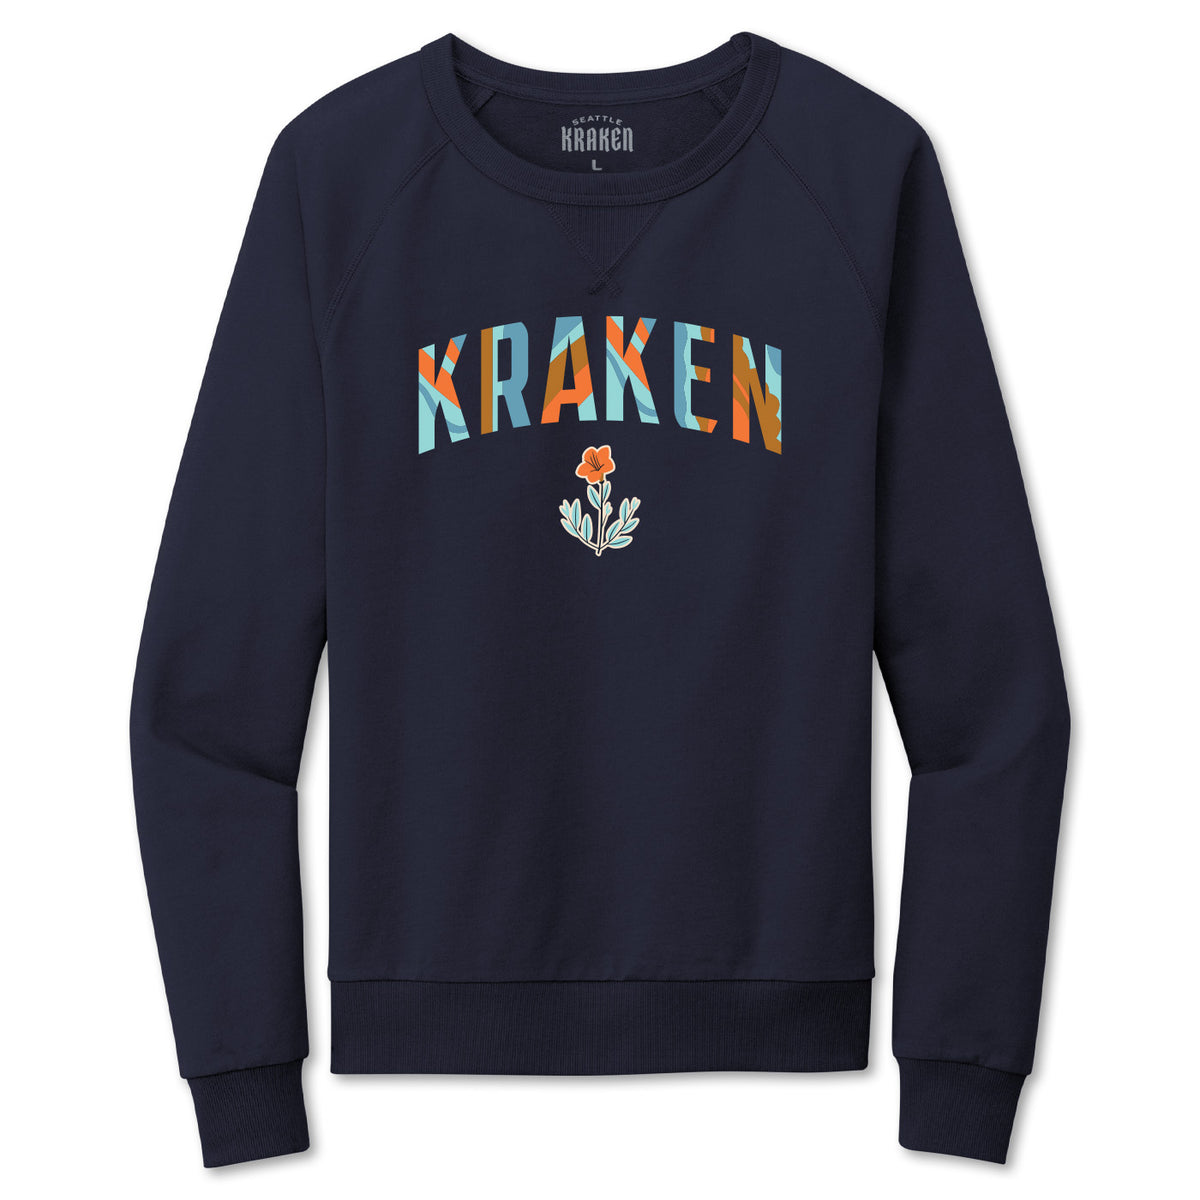 Seattle Kraken - As part of our upcoming Women in Hockey Night, pres. by  Starbucks, the #SeaKraken will warm up in these specialty jerseys designed  by local illustrator Erin Wallace. Discover how